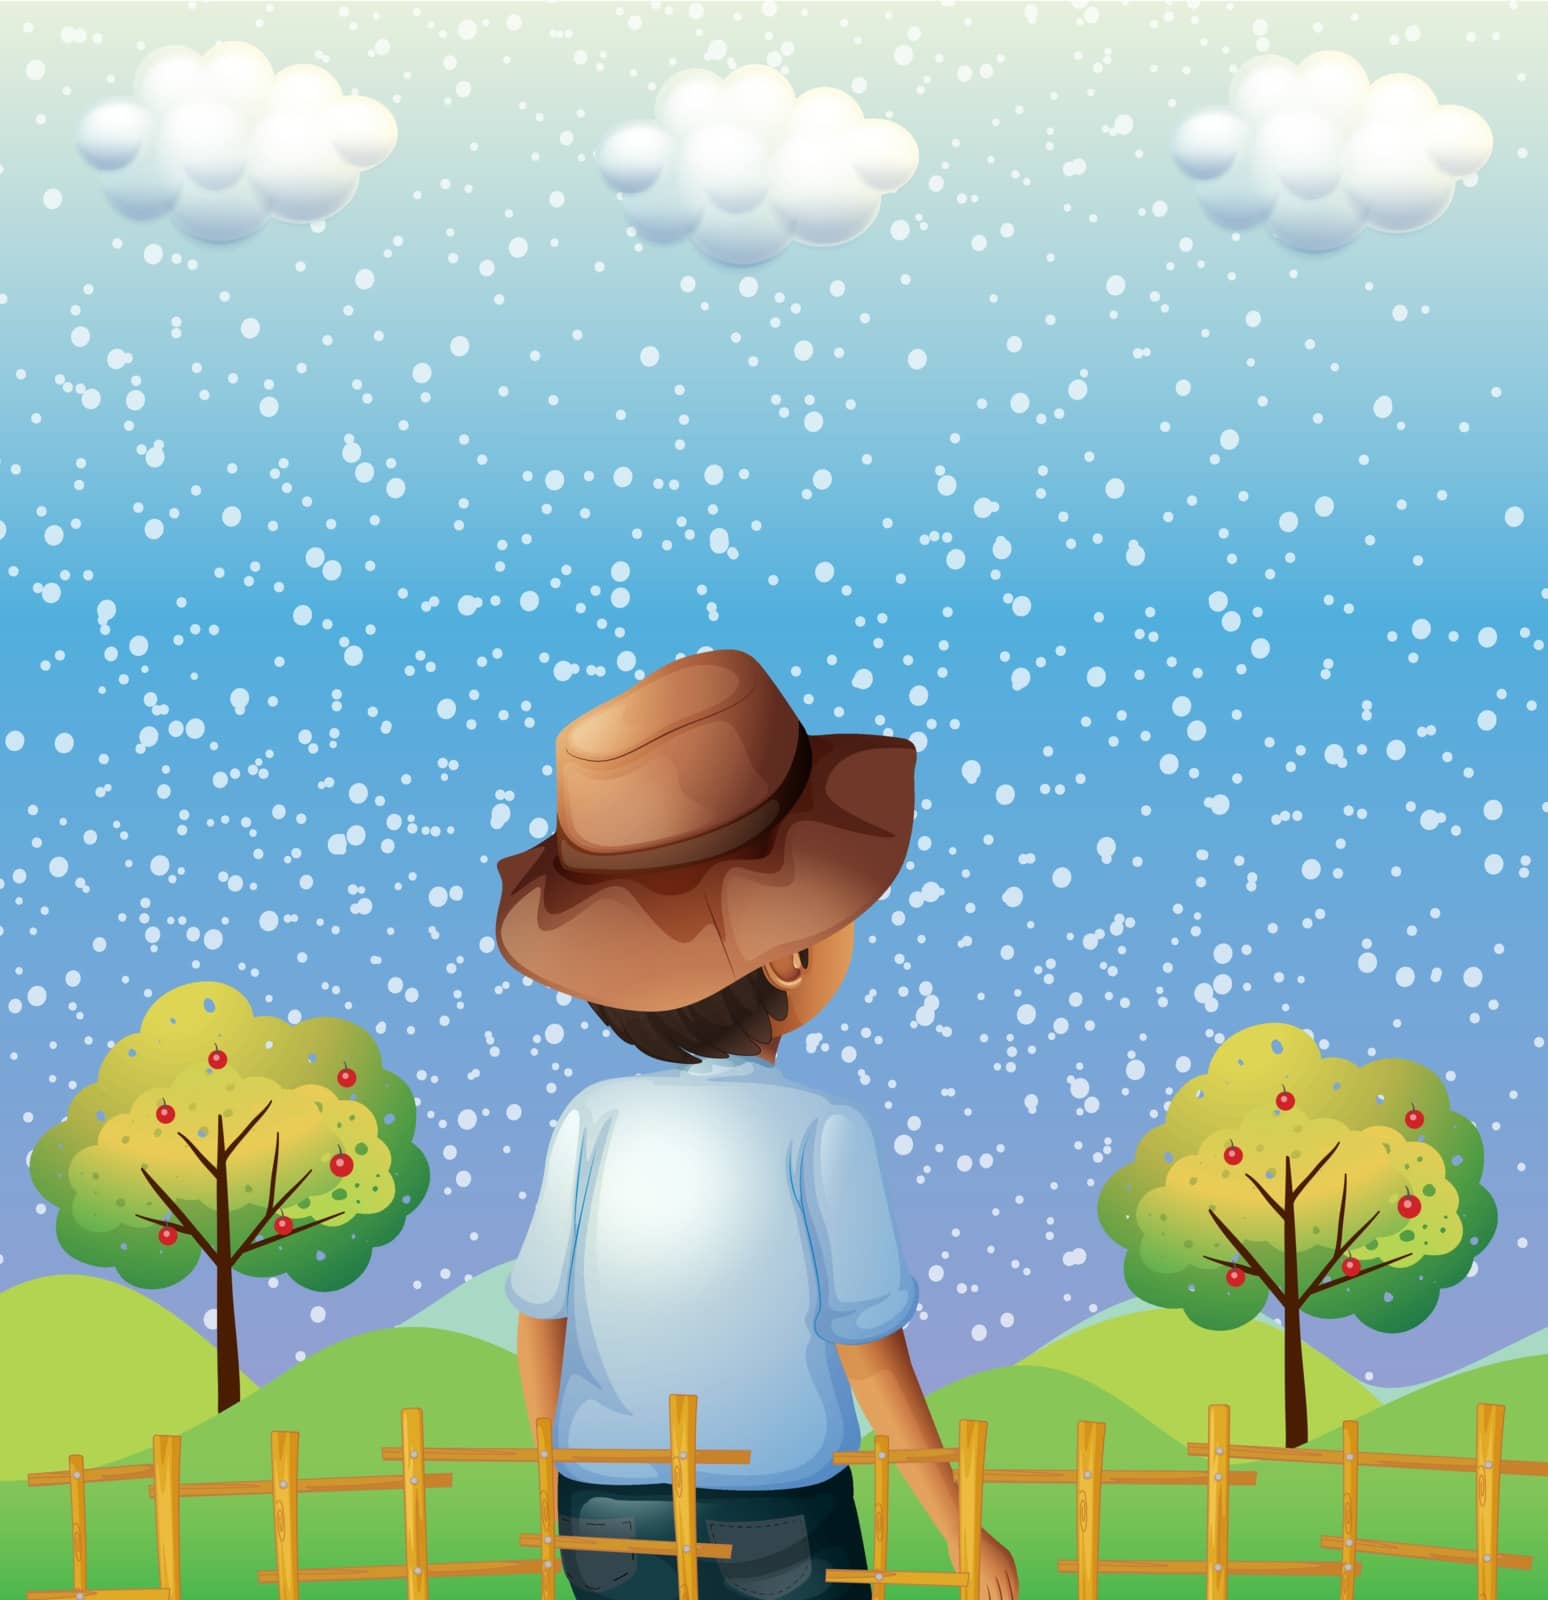 Illustration of a boy watching the sky